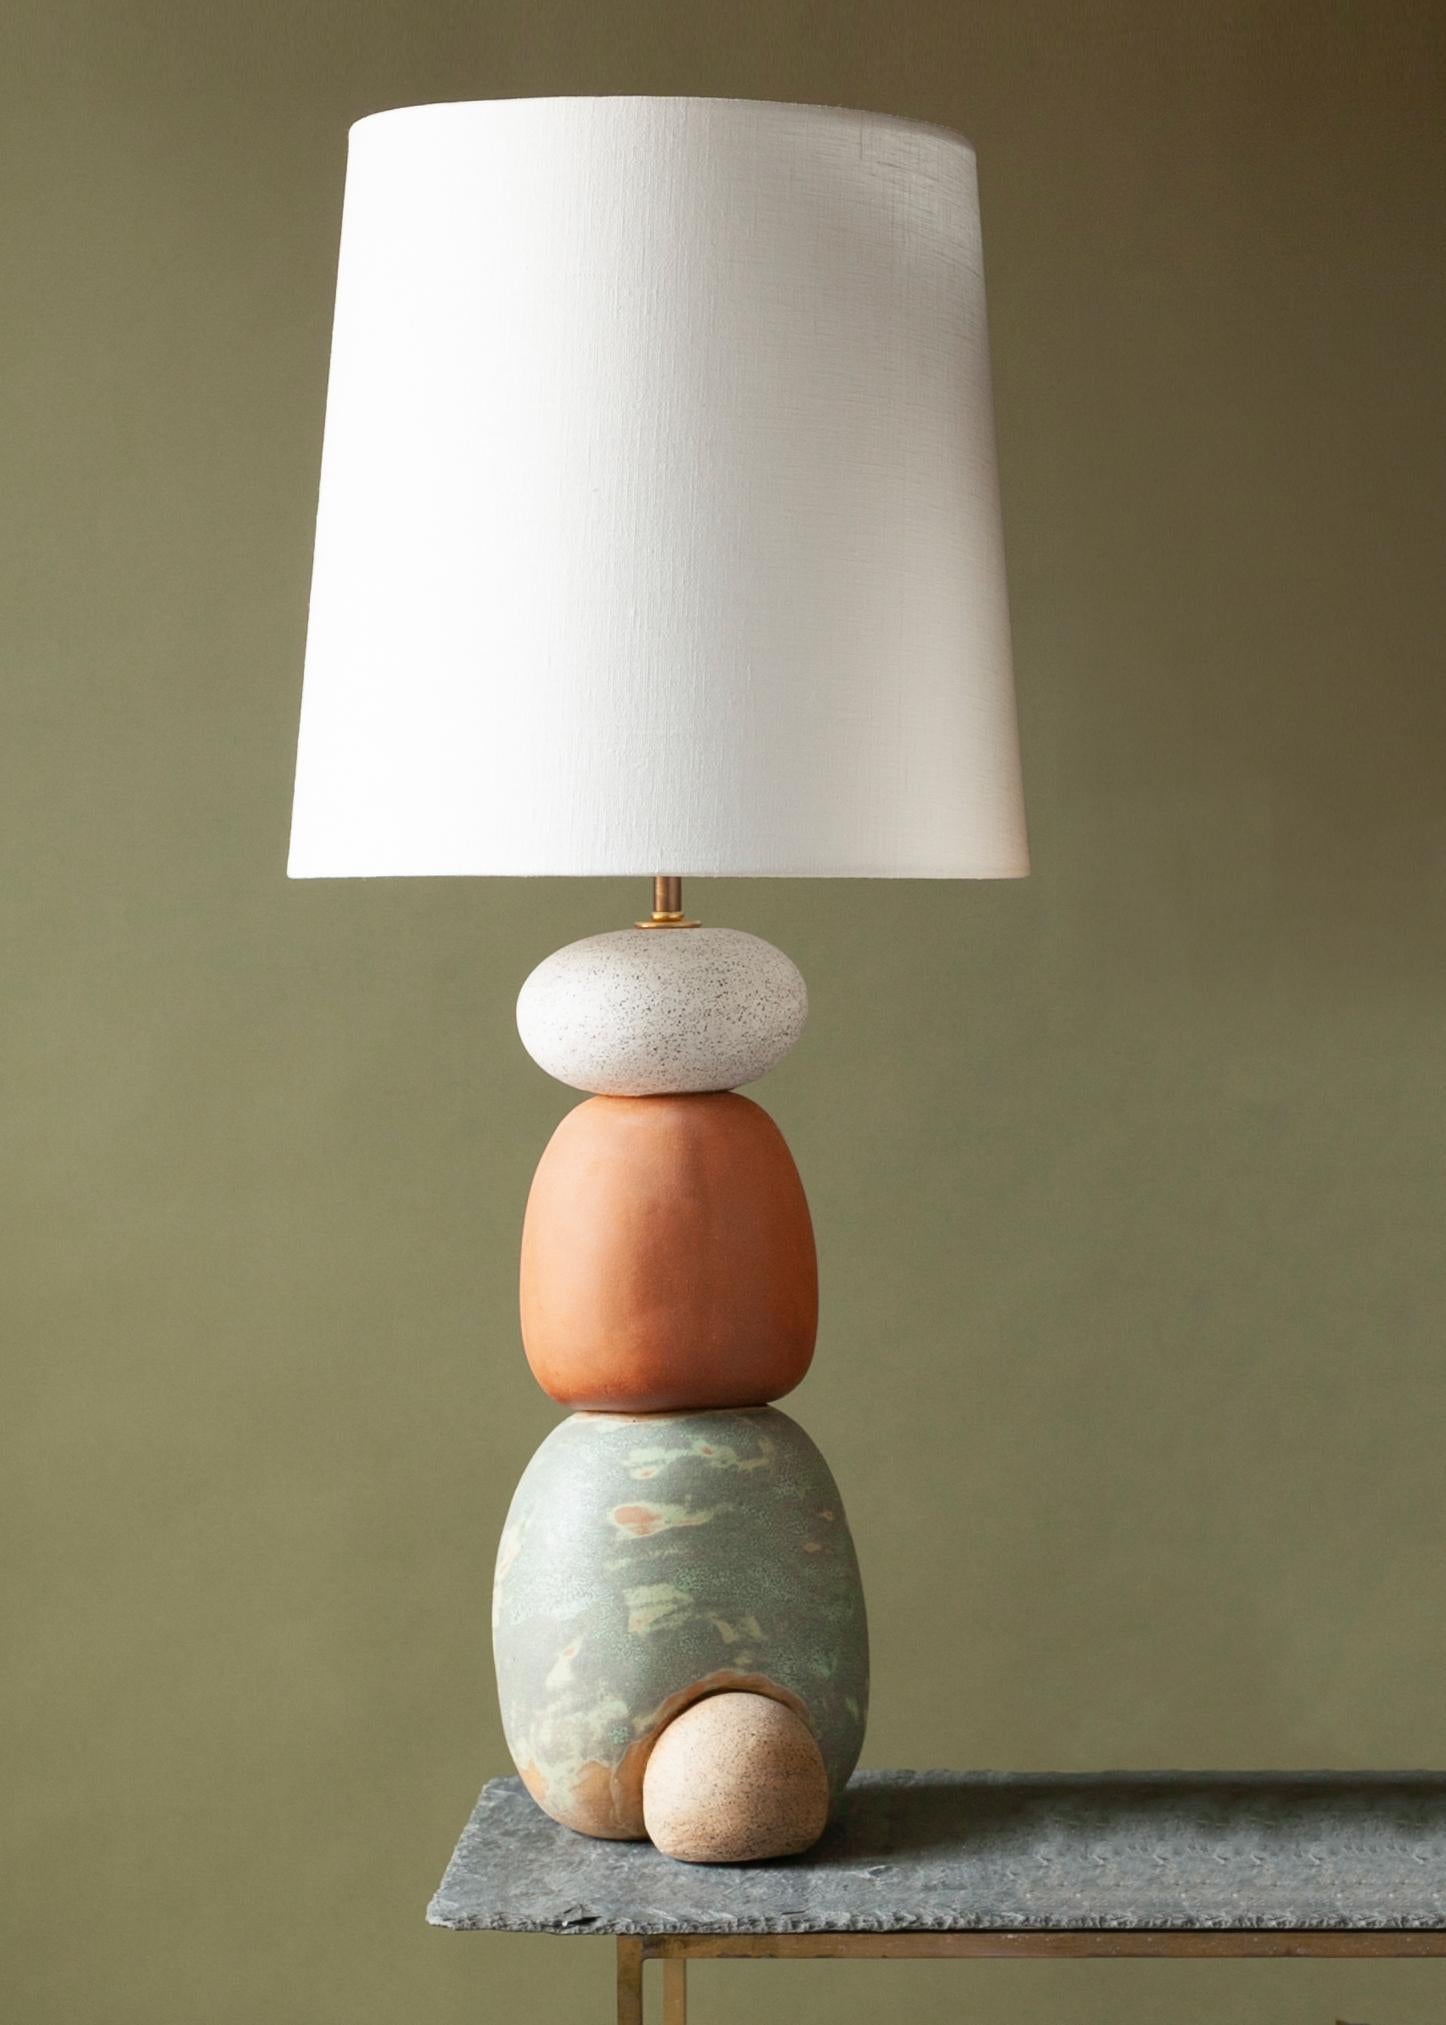 One of a kind ceramic lamp, thrown on the potters wheel and assembled by hand. This is a larger version of the original West lamp. The lamp base is comprised of two different clay bodies and features a coppery green handmade glaze in contrast to a